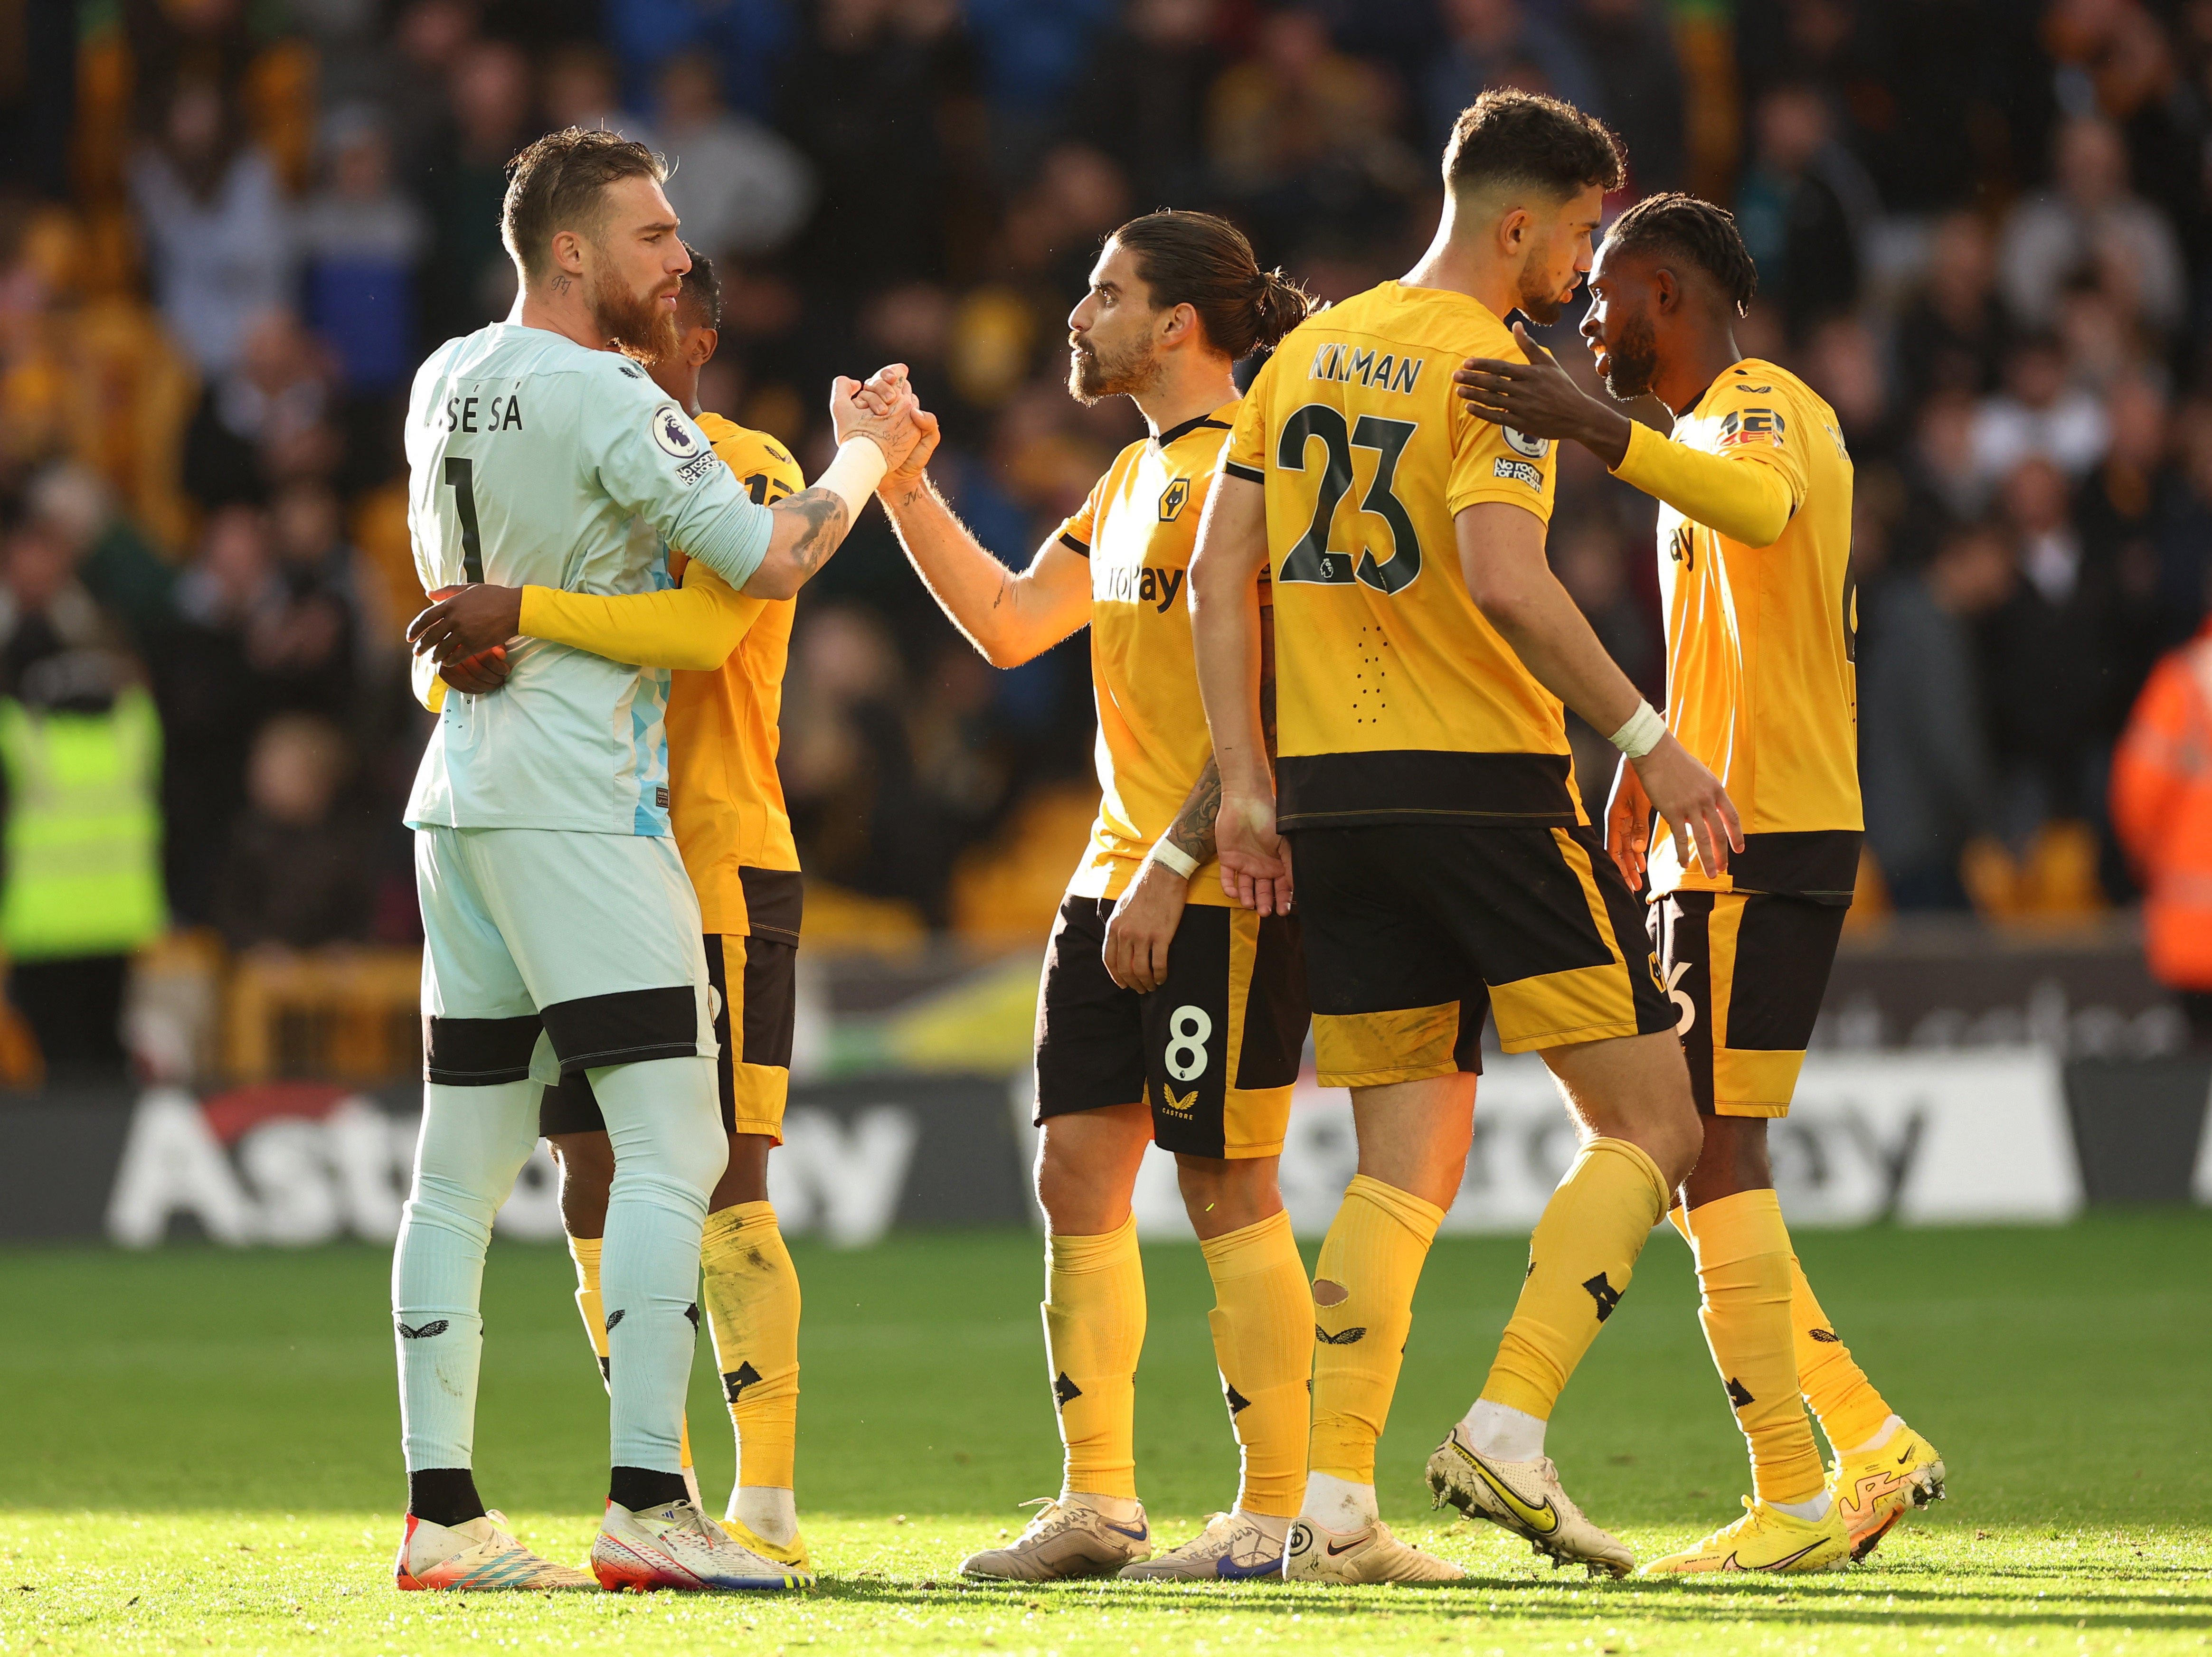 Ruben Neves and Jose Sa earn struggling Wolves vital win over Nottingham Forest The Independent